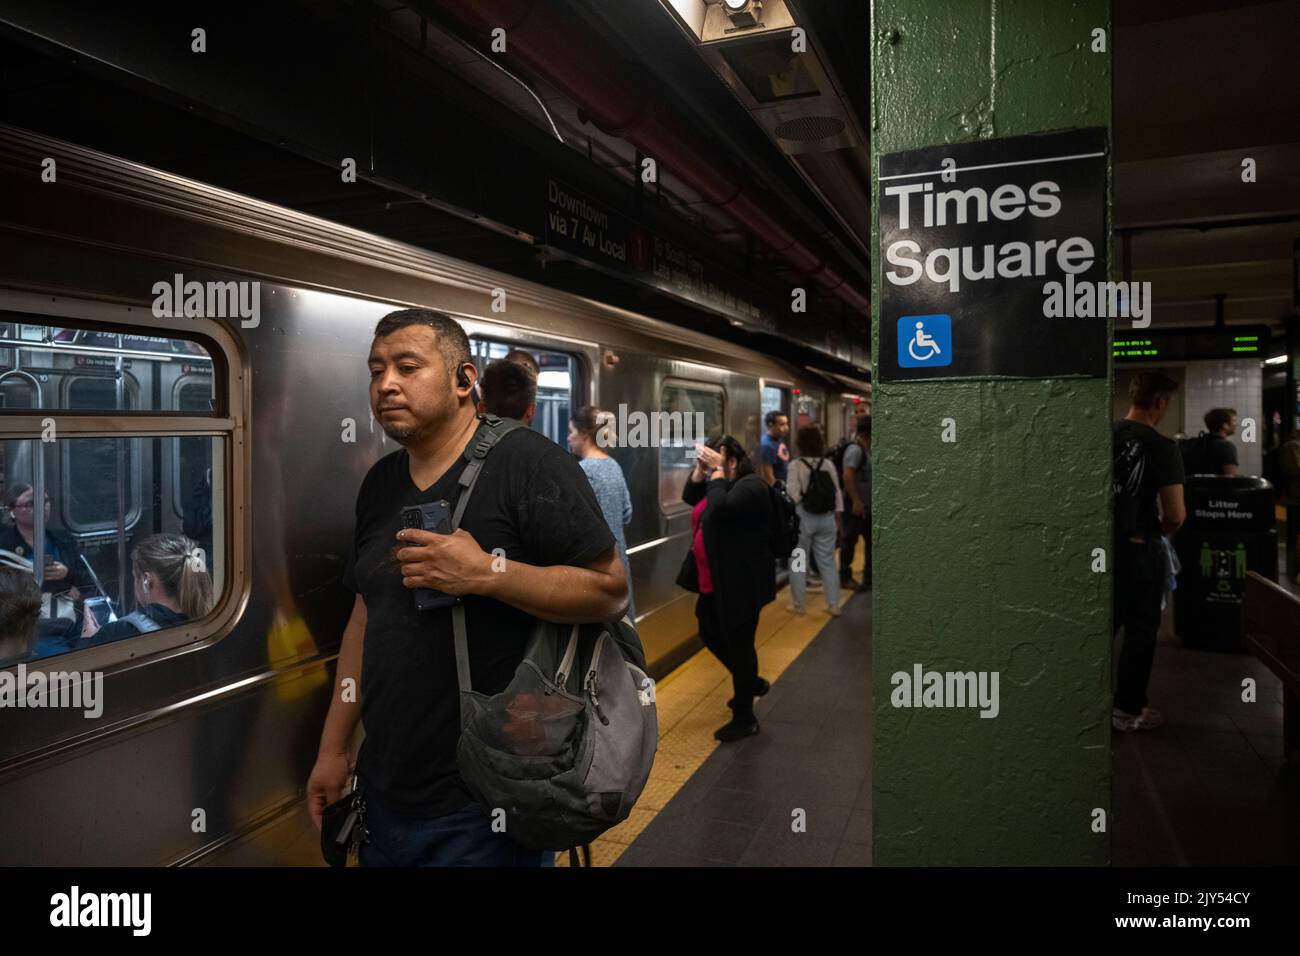 New York, New York, USA 7 September 2022 People with and without masks walk on Times Square subway platform hours after New York State Governor Kathy Hochul lifted tpandemic mask requirement for New York transit riders Credit: Joseph Reid/Alamy Live News Stock Photo